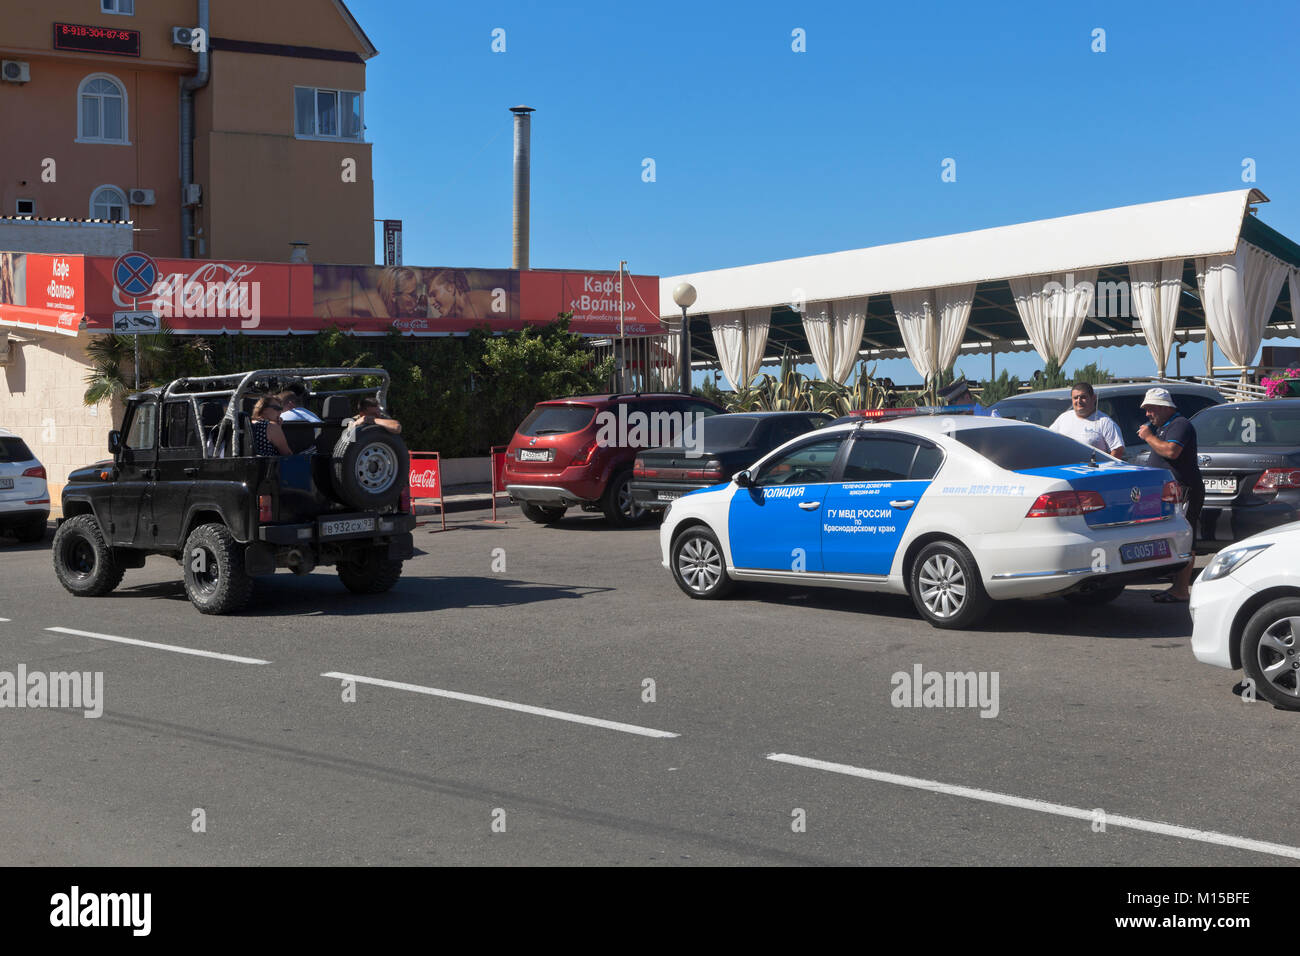 Adler, Sochi, Krasnodar region, Russia - July 13, 2016: Police stopped an open a UAZ car with passengers on the streets of settlement Adrer, Sochi Stock Photo